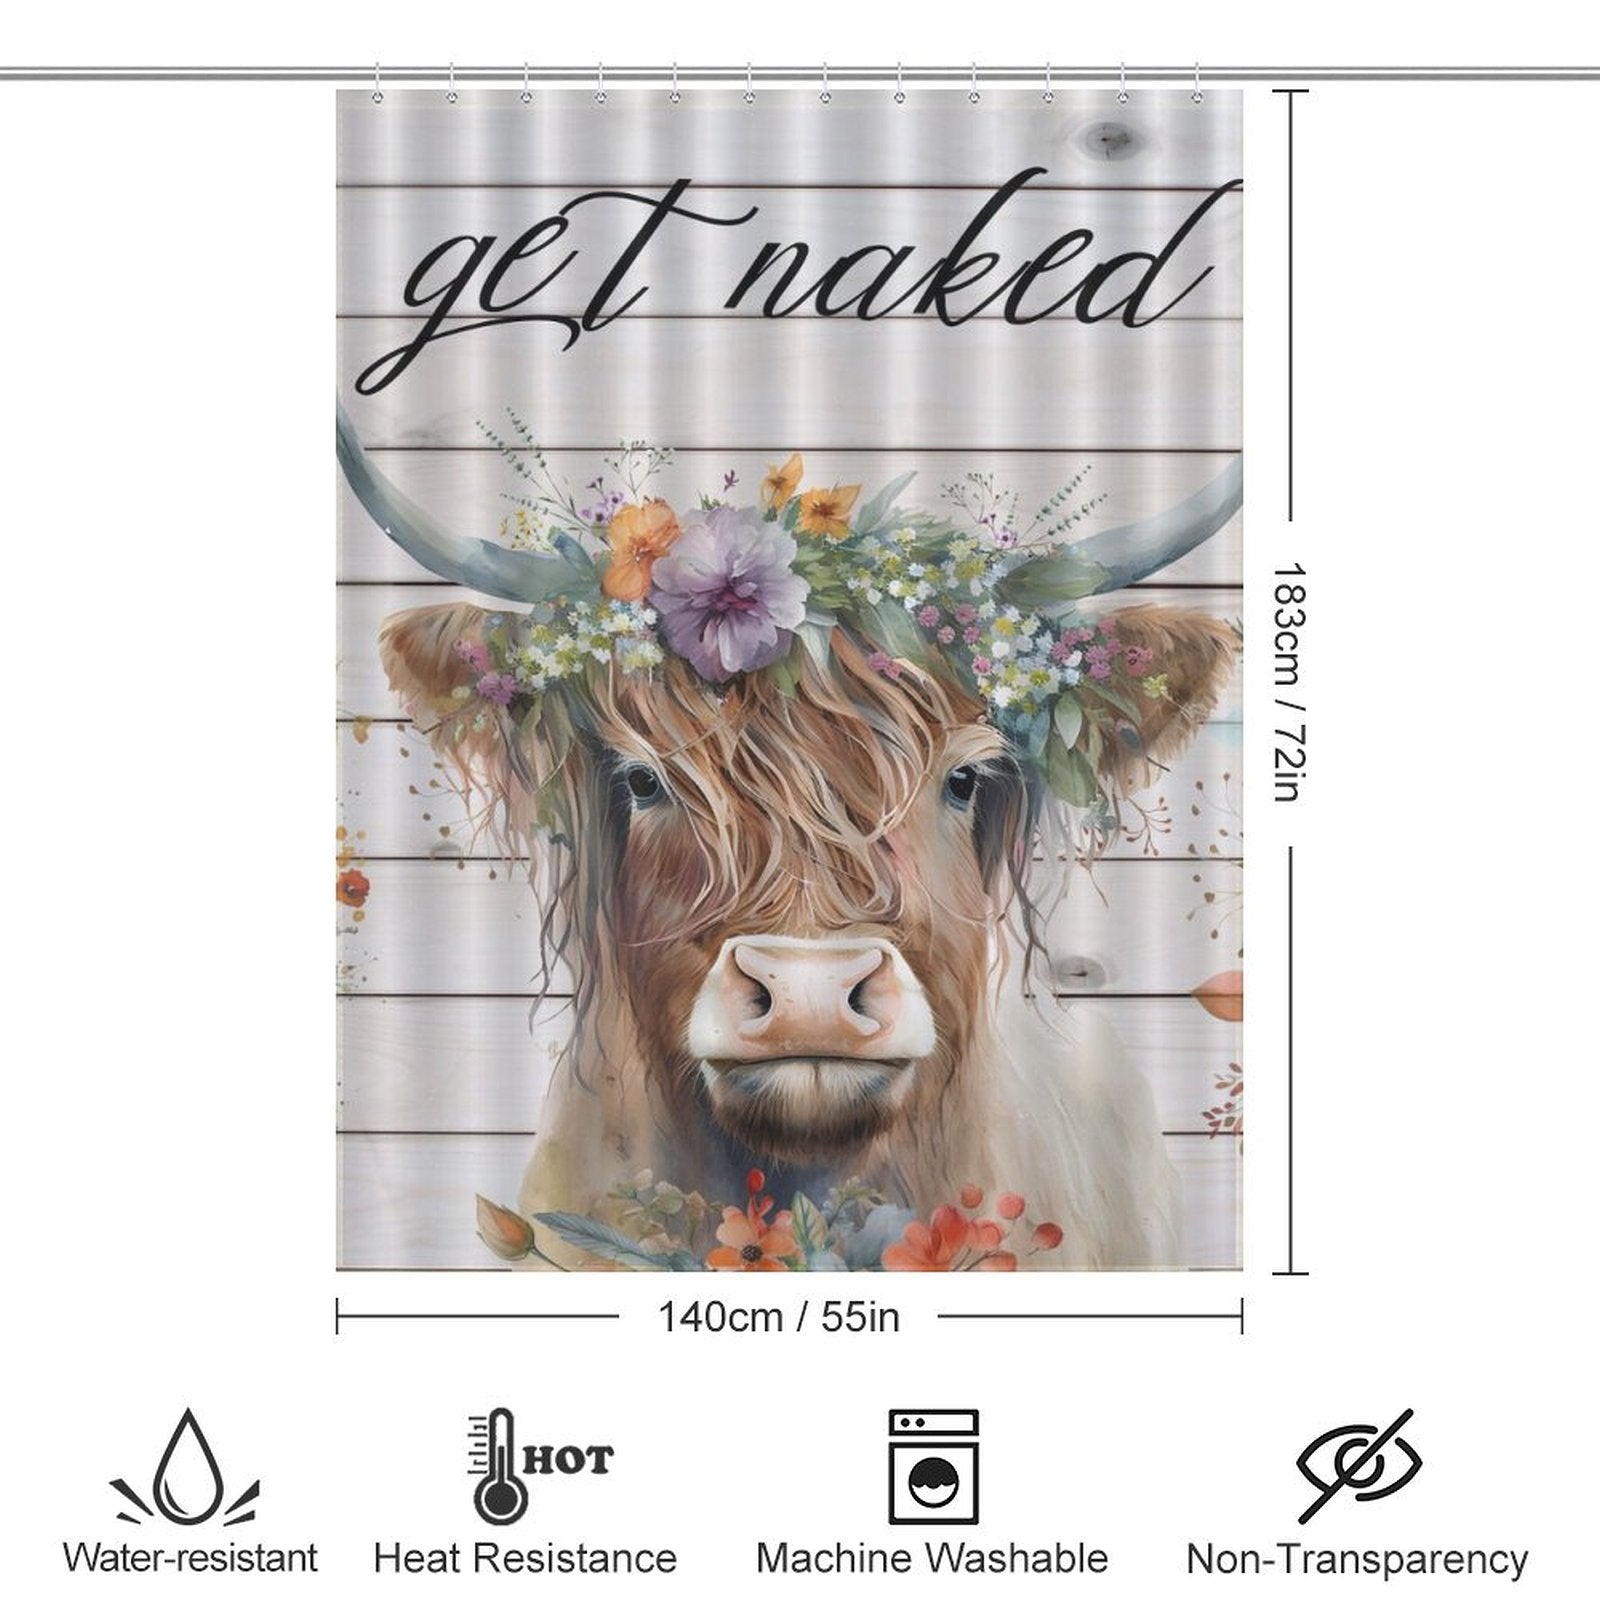 This Funny Letters Get Naked Flower Highland Cow Shower Curtain-Cottoncat by Cotton Cat showcases a charming highland cow with a flower crown and the humorous text "get naked" at the top. Measuring 183cm x 140cm, it's water-resistant, heat-resistant, machine washable, and non-transparent—ideal for a stylish and practical bathroom upgrade.